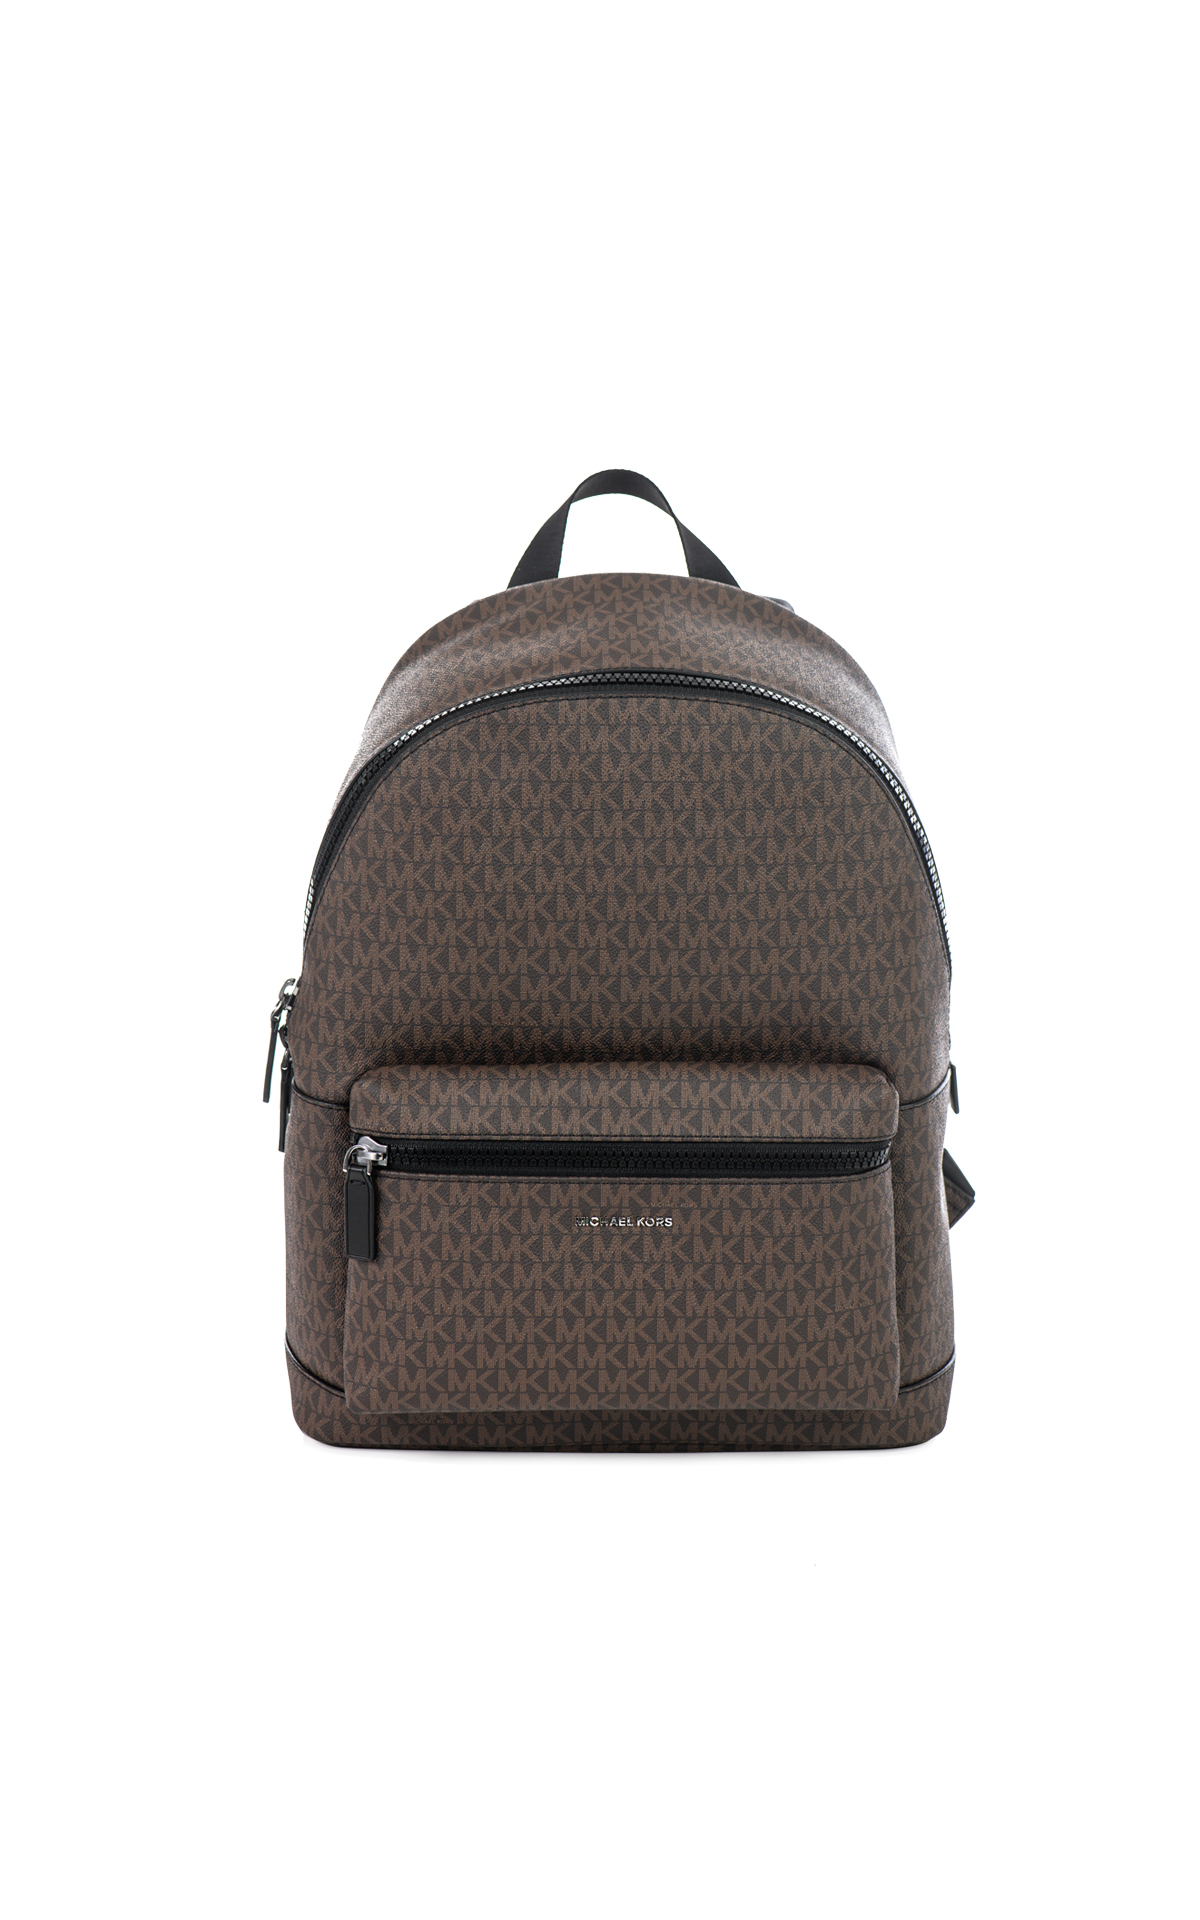 Backpack with MK logo